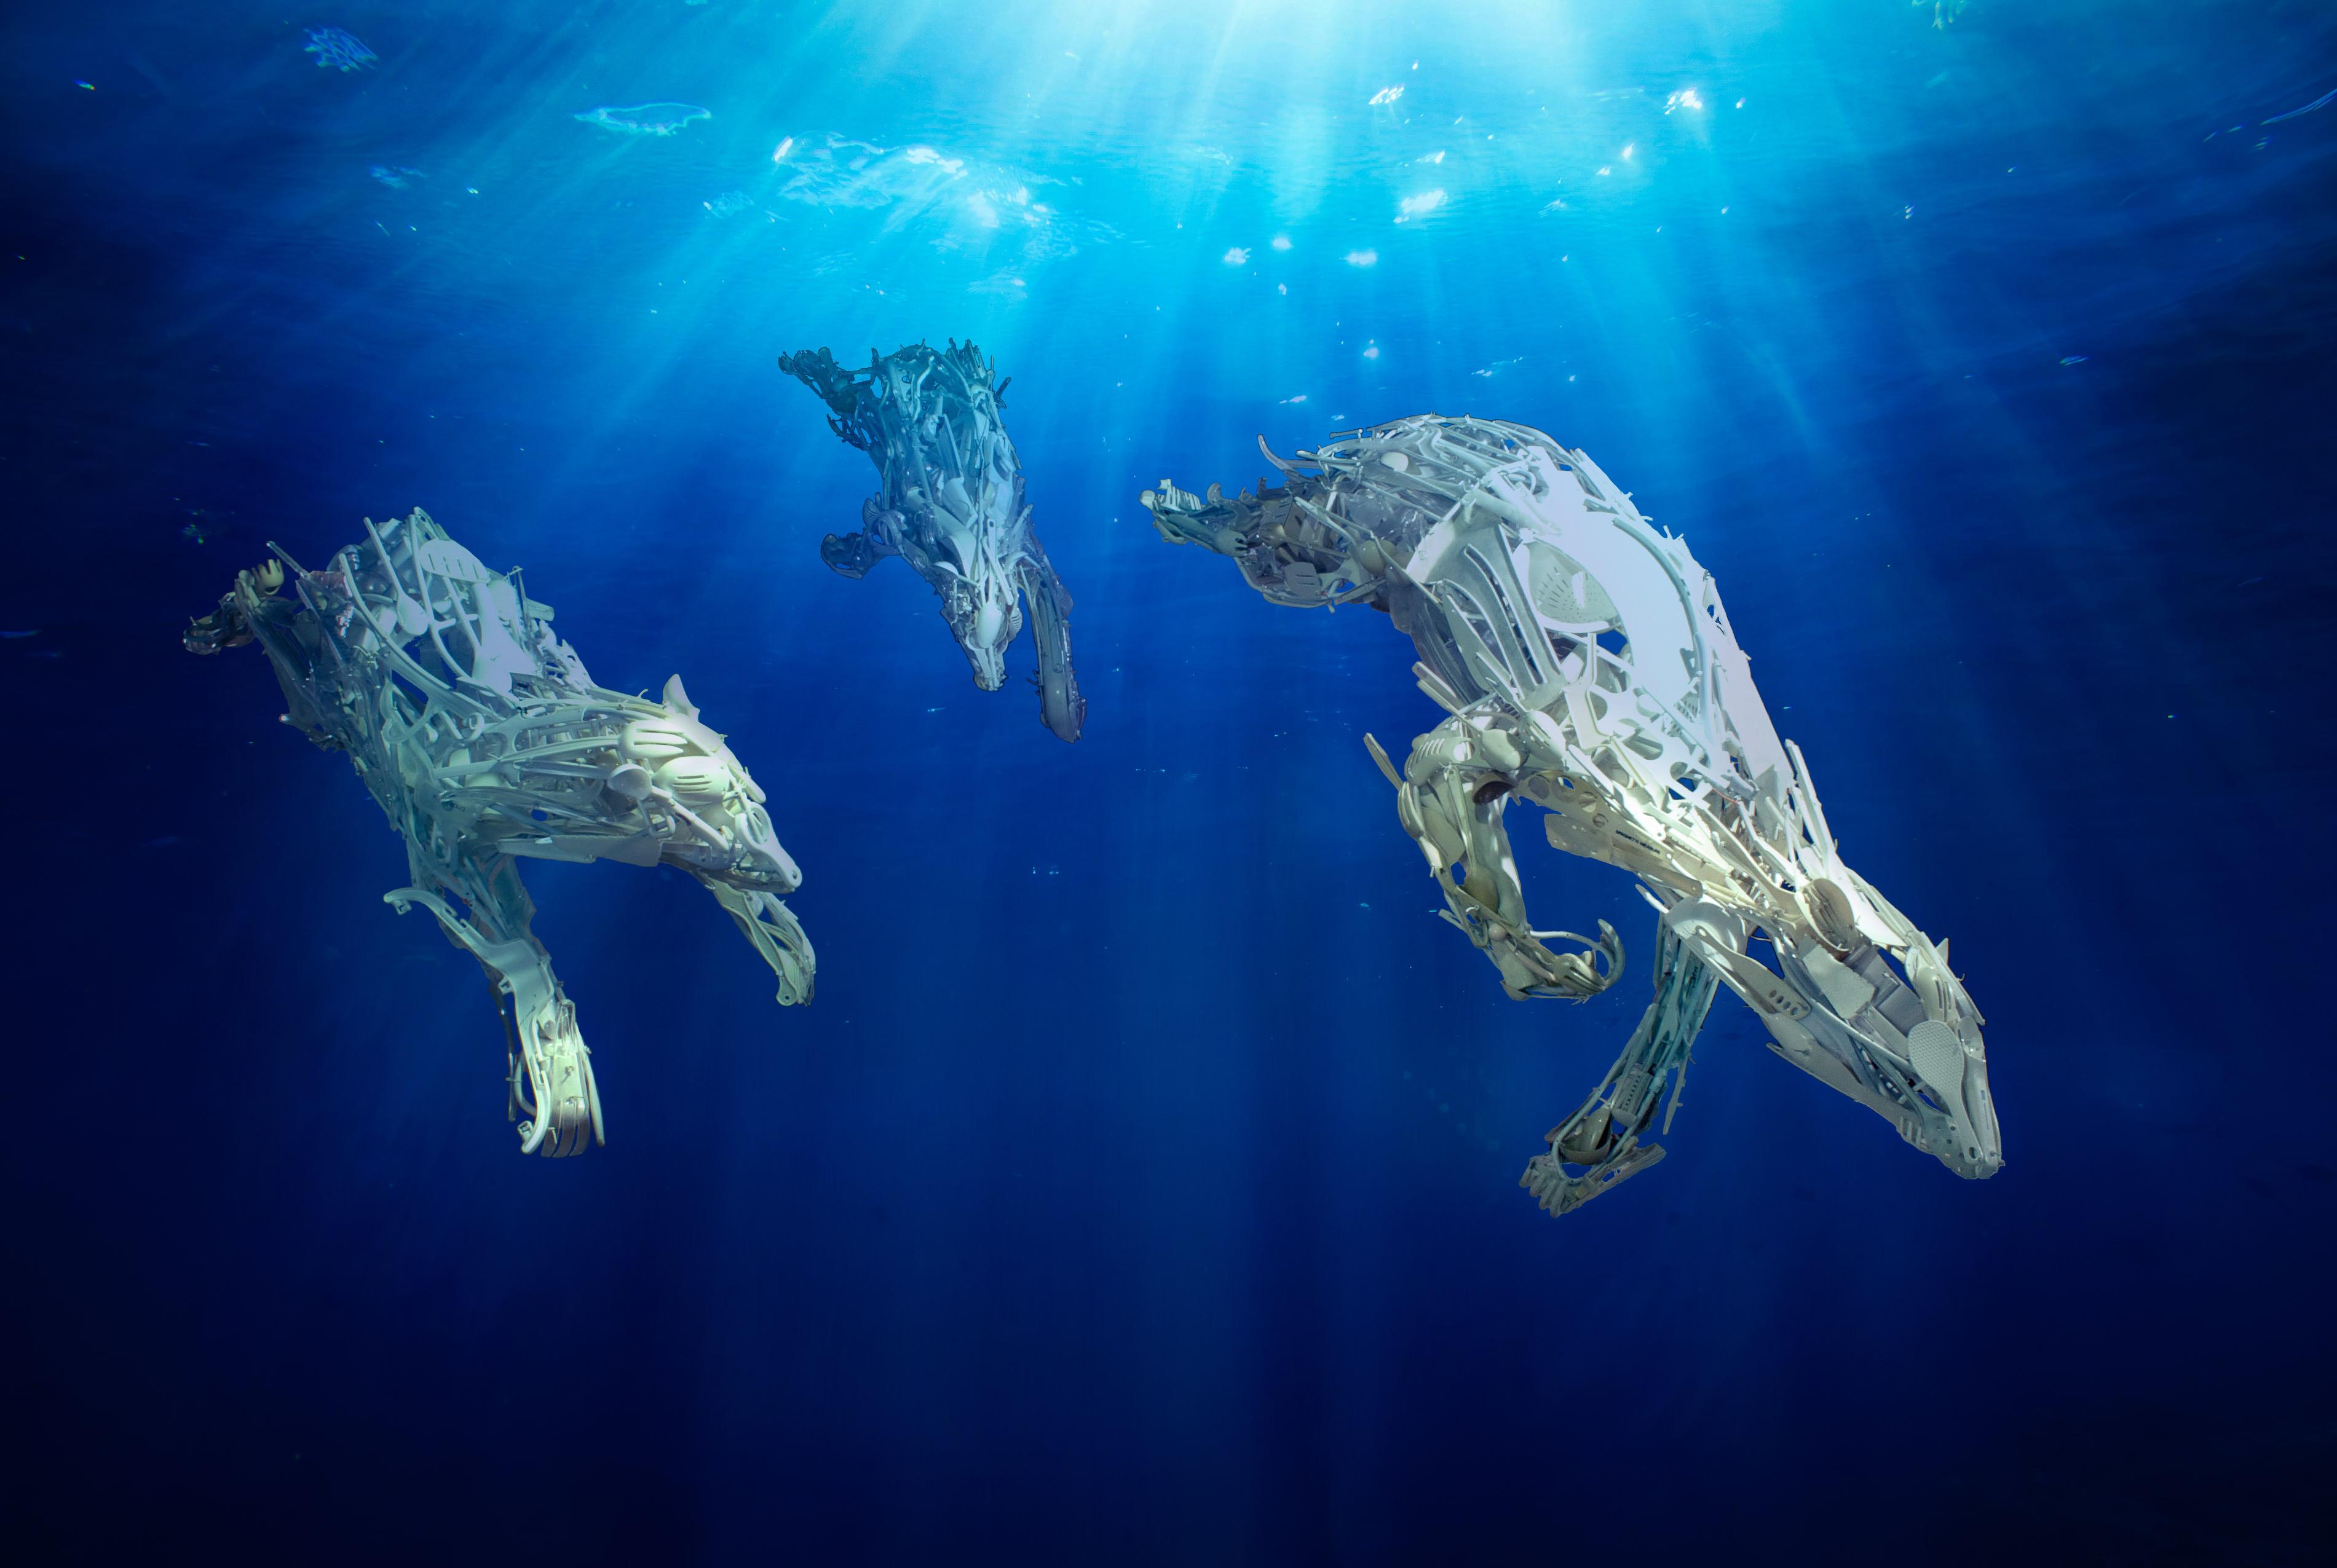 polar bears crafted out of reclaimed plastic in blue water installation